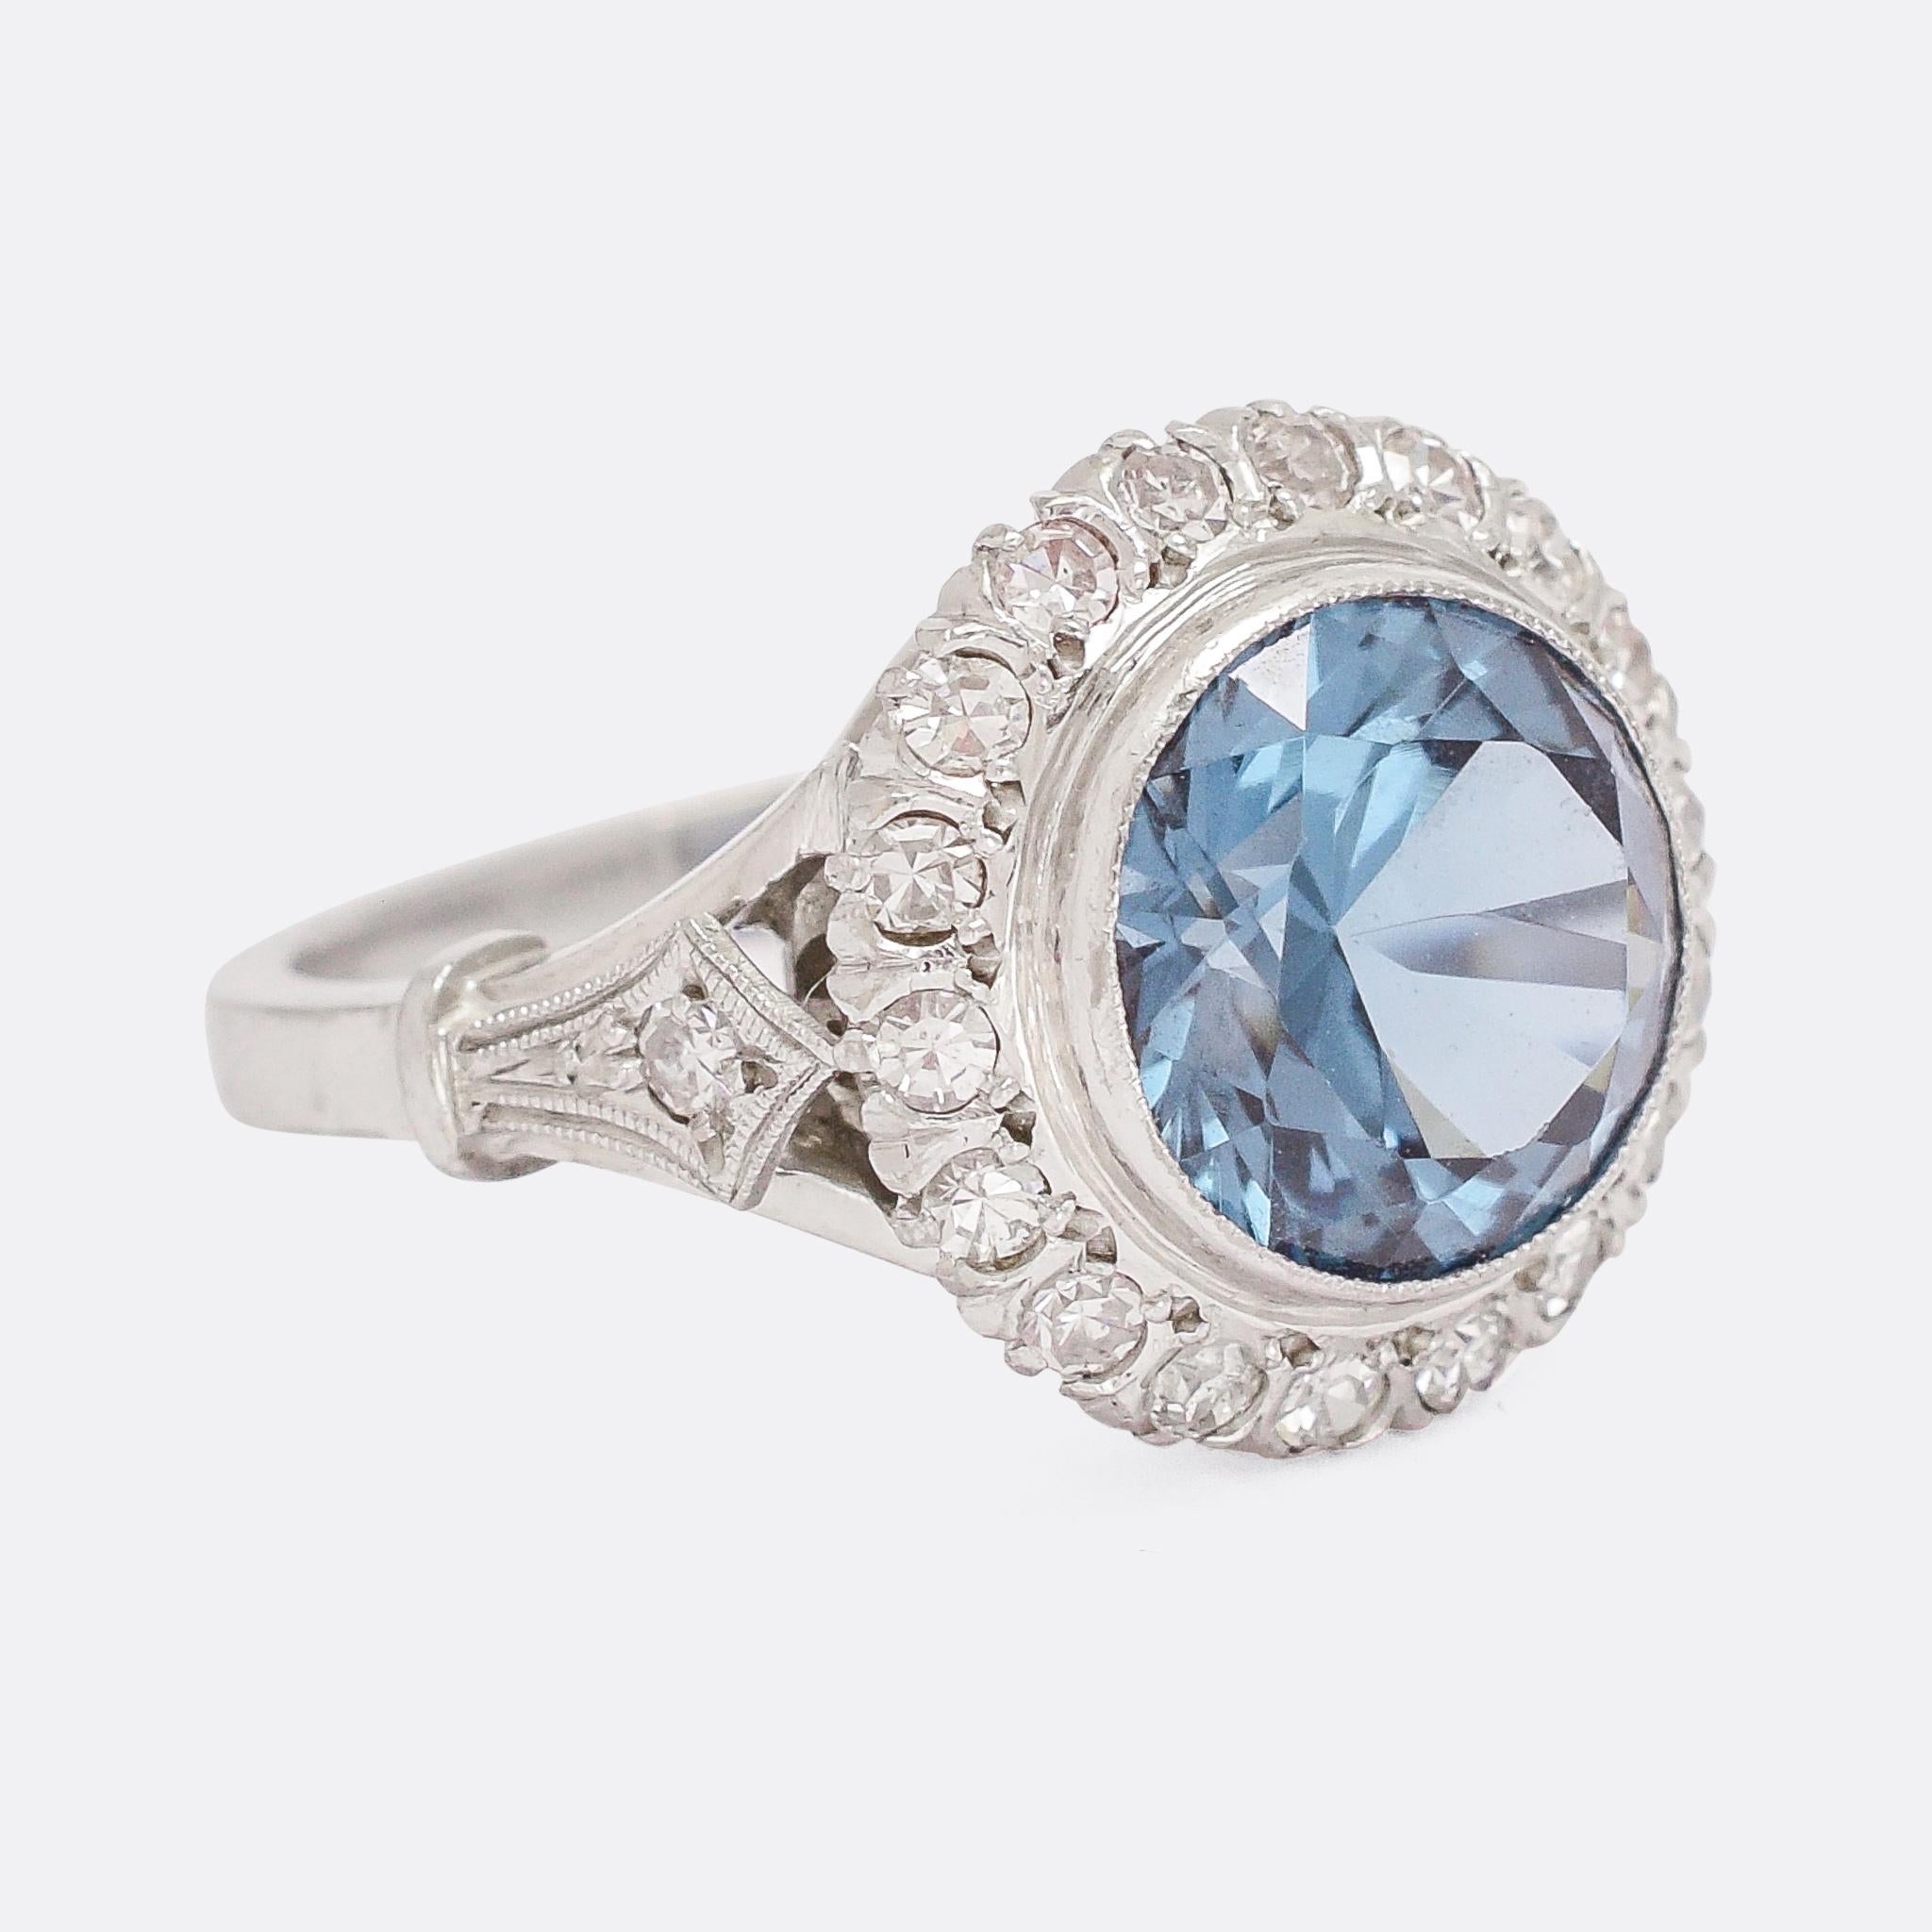 A wonderful Art Deco cocktail ring set with a juicy 5.2ct blue zircon surrounded by a ring of fine millegrain and a halo of diamonds. The styling is very typically deco, with diamond millegrain shoulder accents and crafted in platinum throughout. A